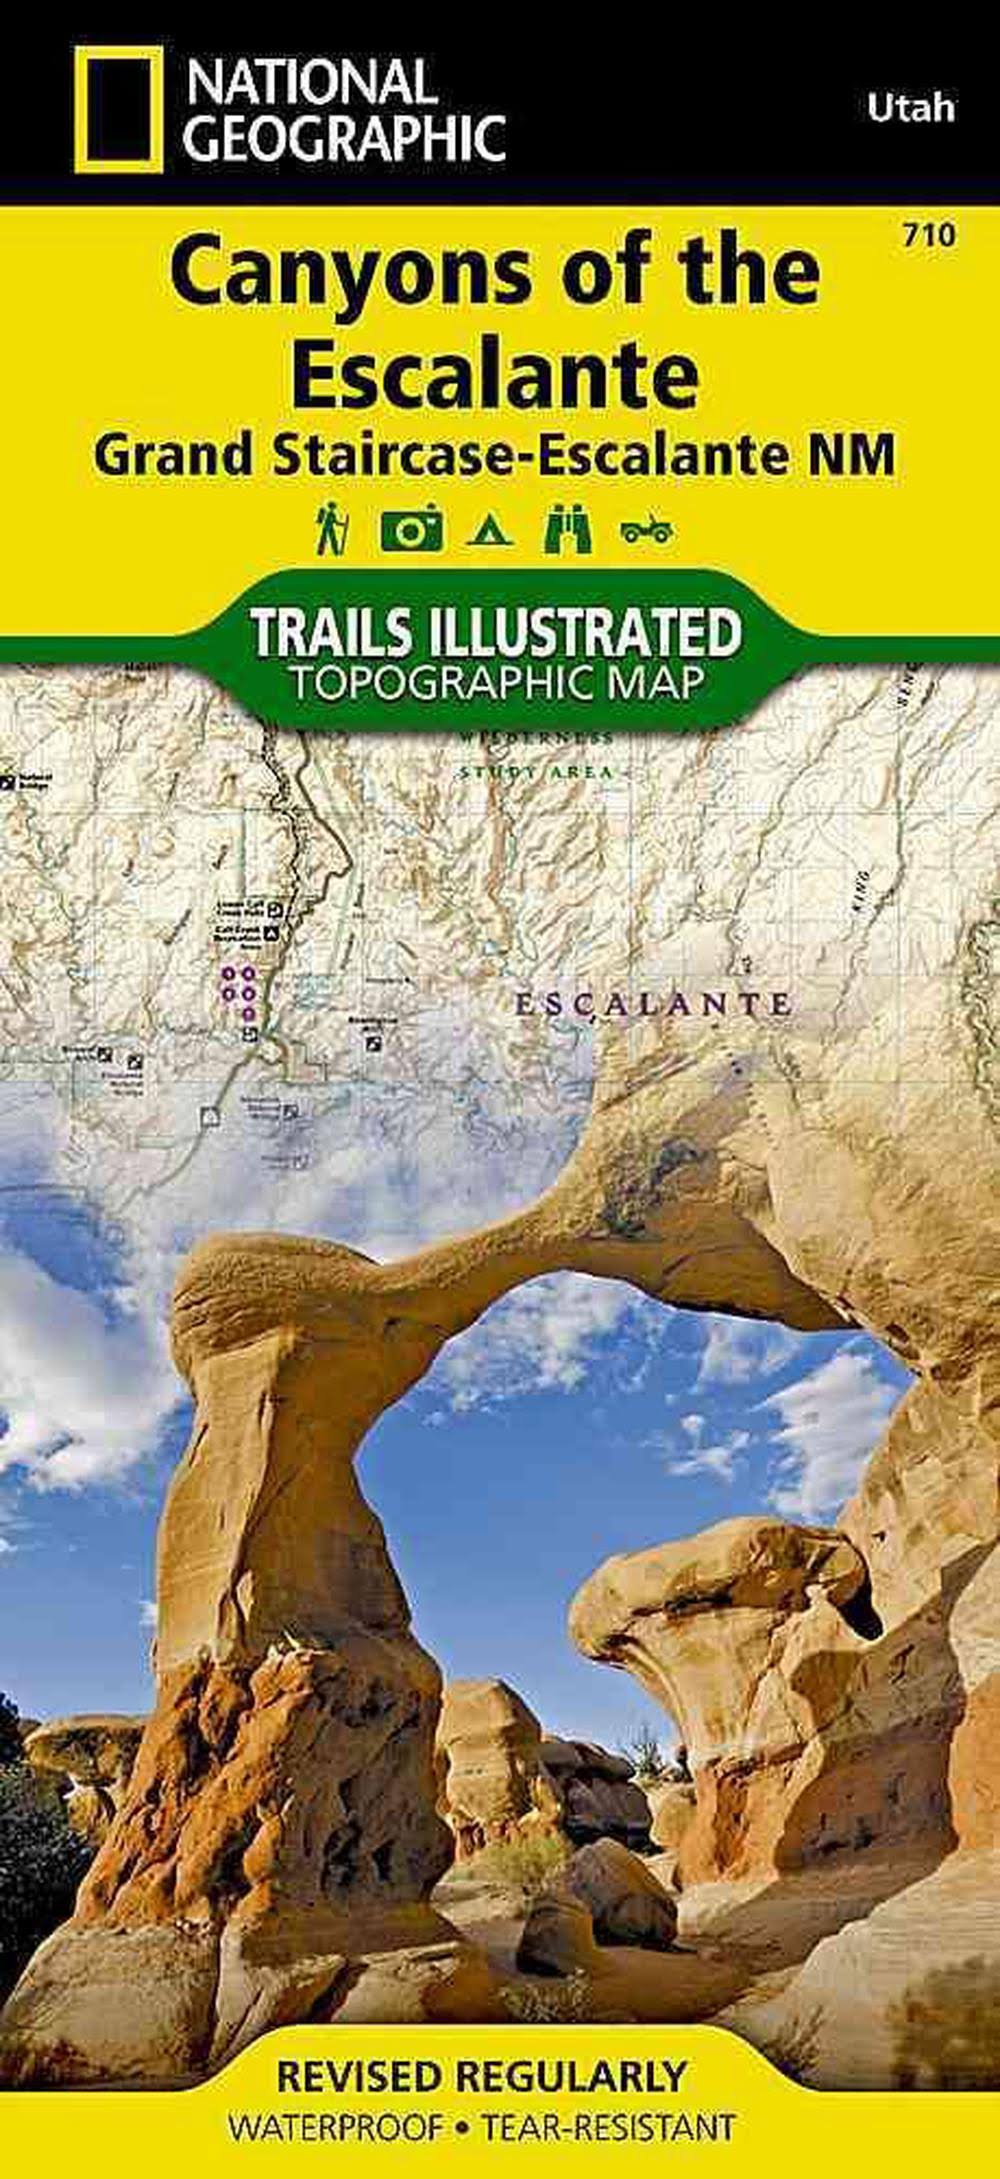 National Geographic Canyons of the Escalante Trails Illustrated Map: Grand Staircase - Escalante NM [Book]